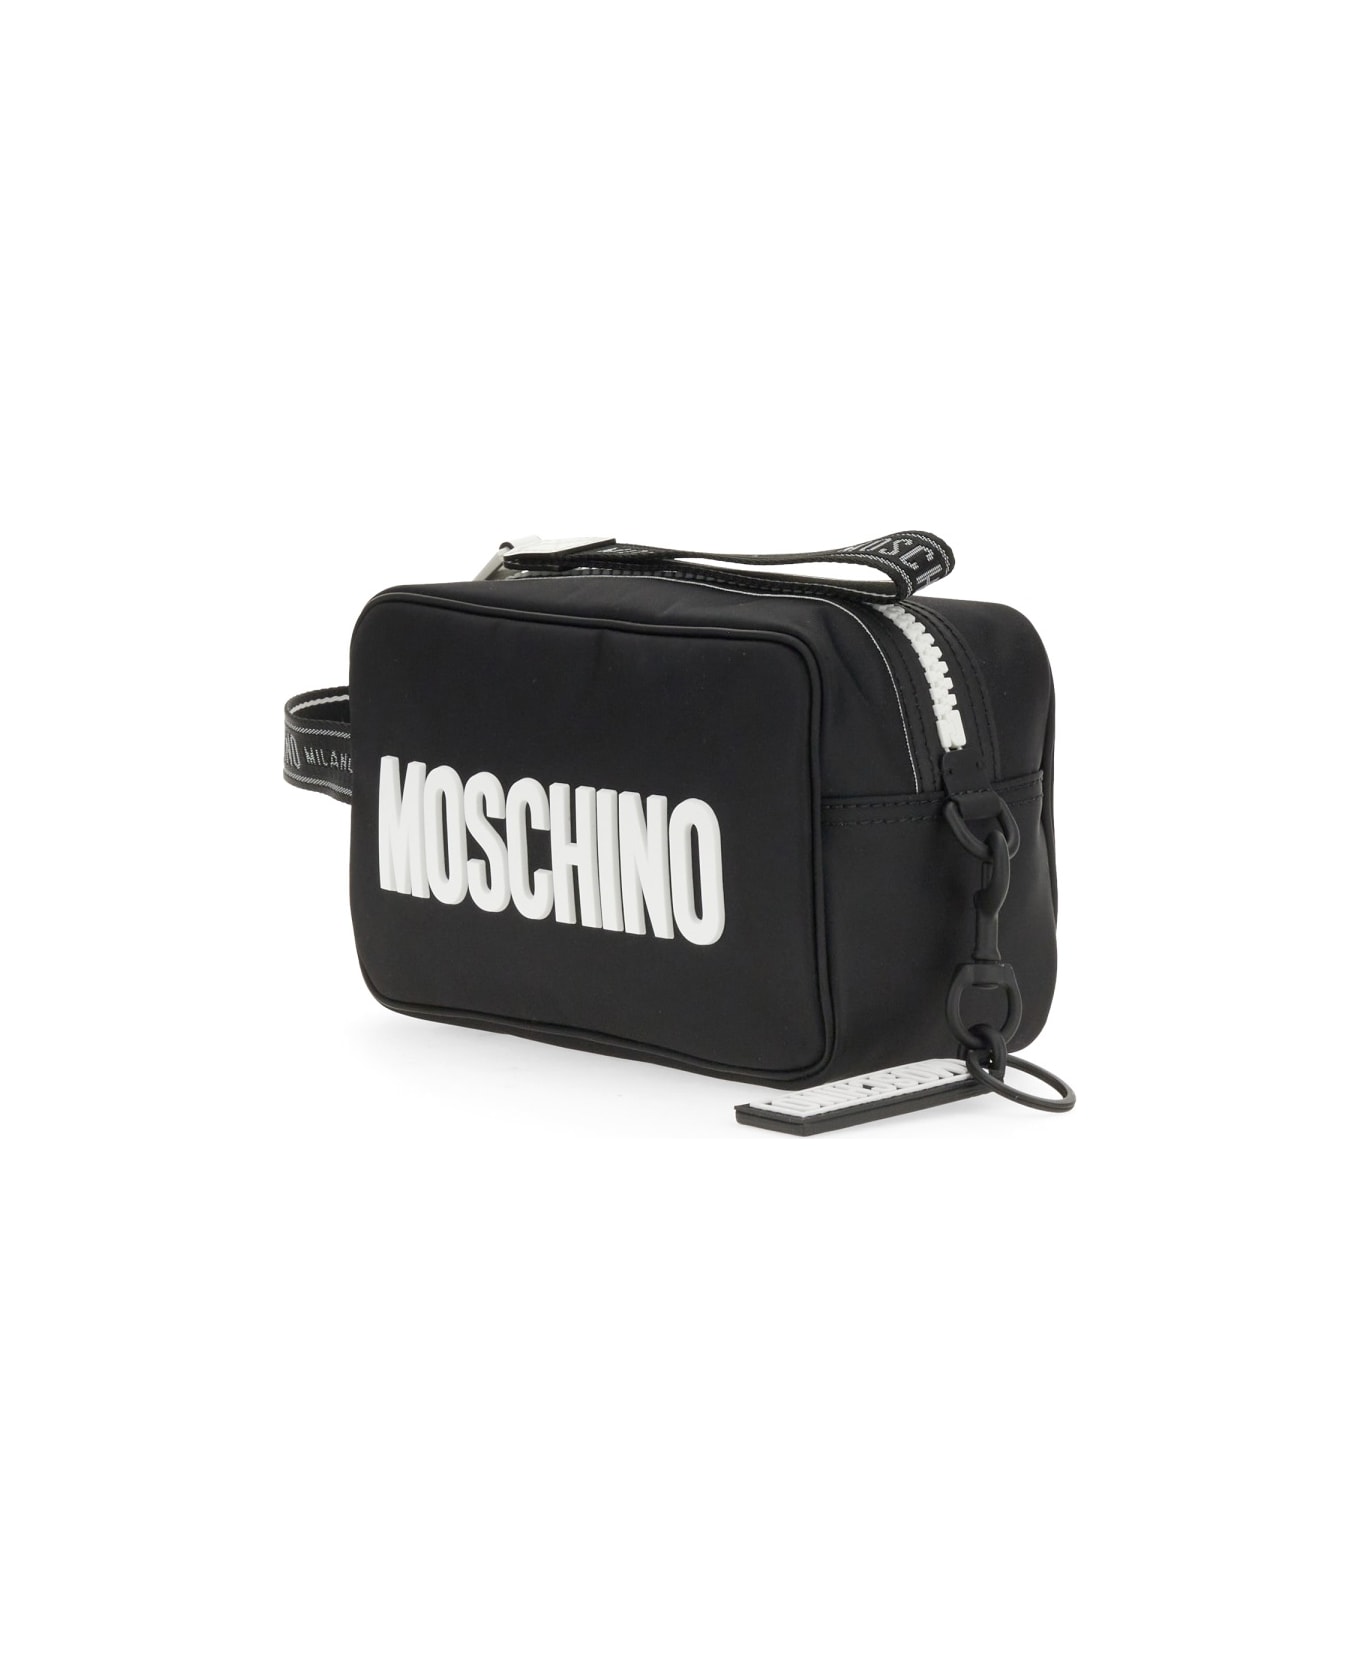 Moschino Beauty Case With Logo - BLACK バッグ